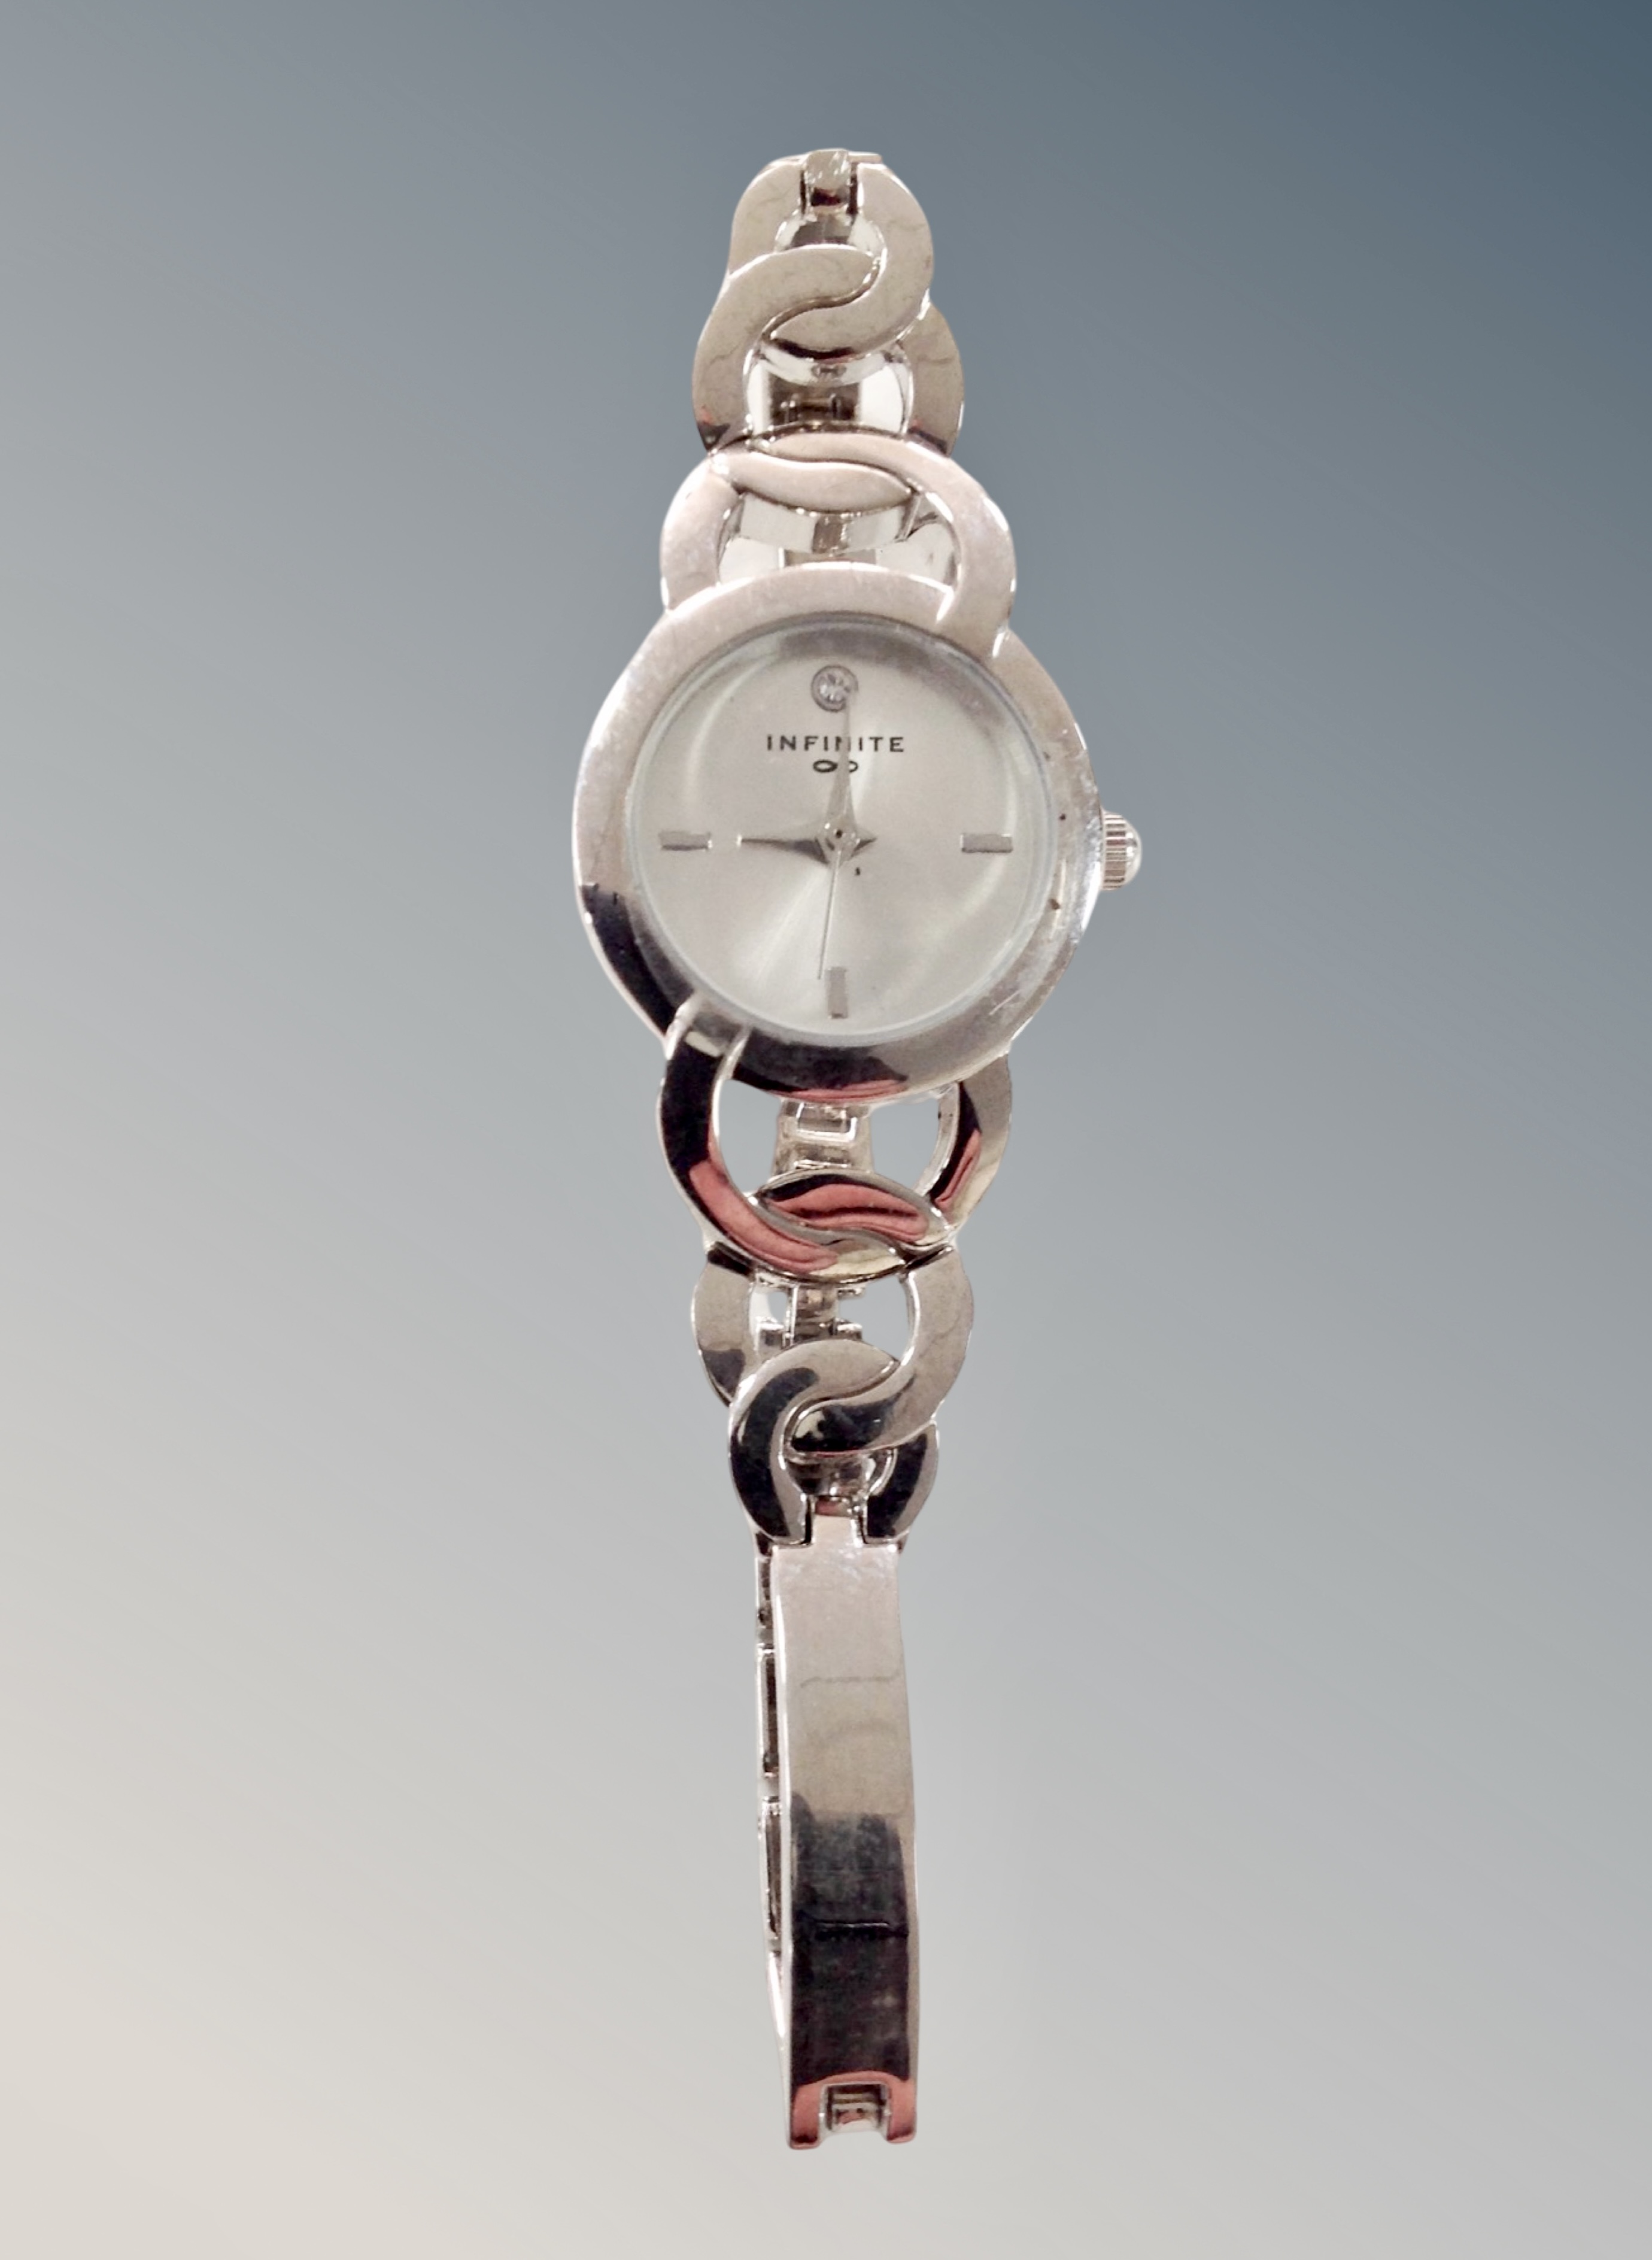 A lady's stainless steel Infinite wristwatch